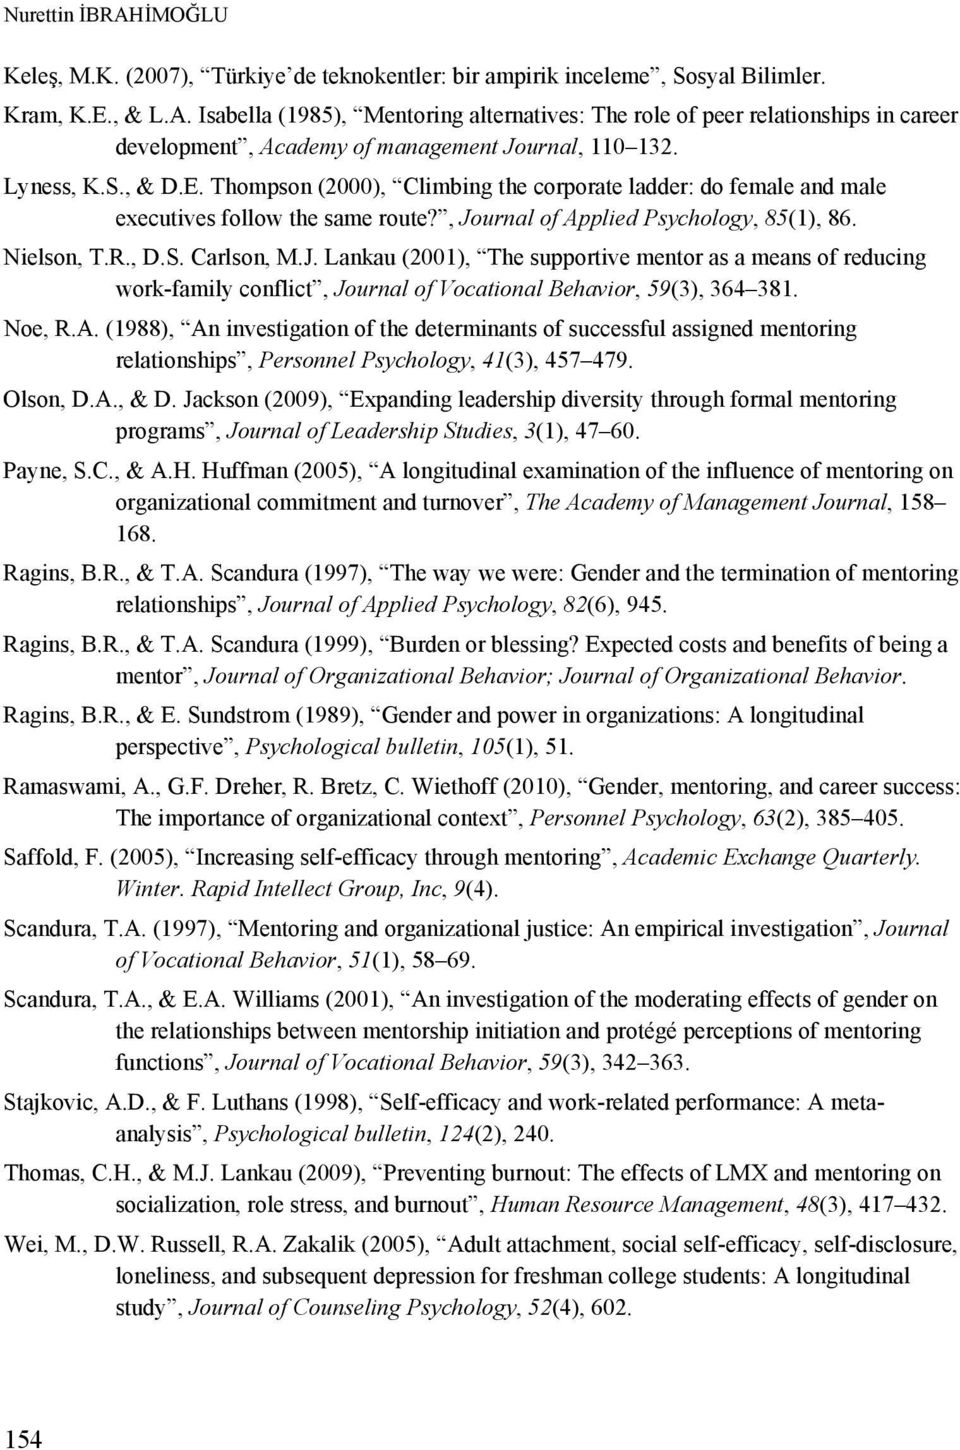 urnal of Applied Psychology, 85(1), 86. Nielson, T.R., D.S. Carlson, M.J.